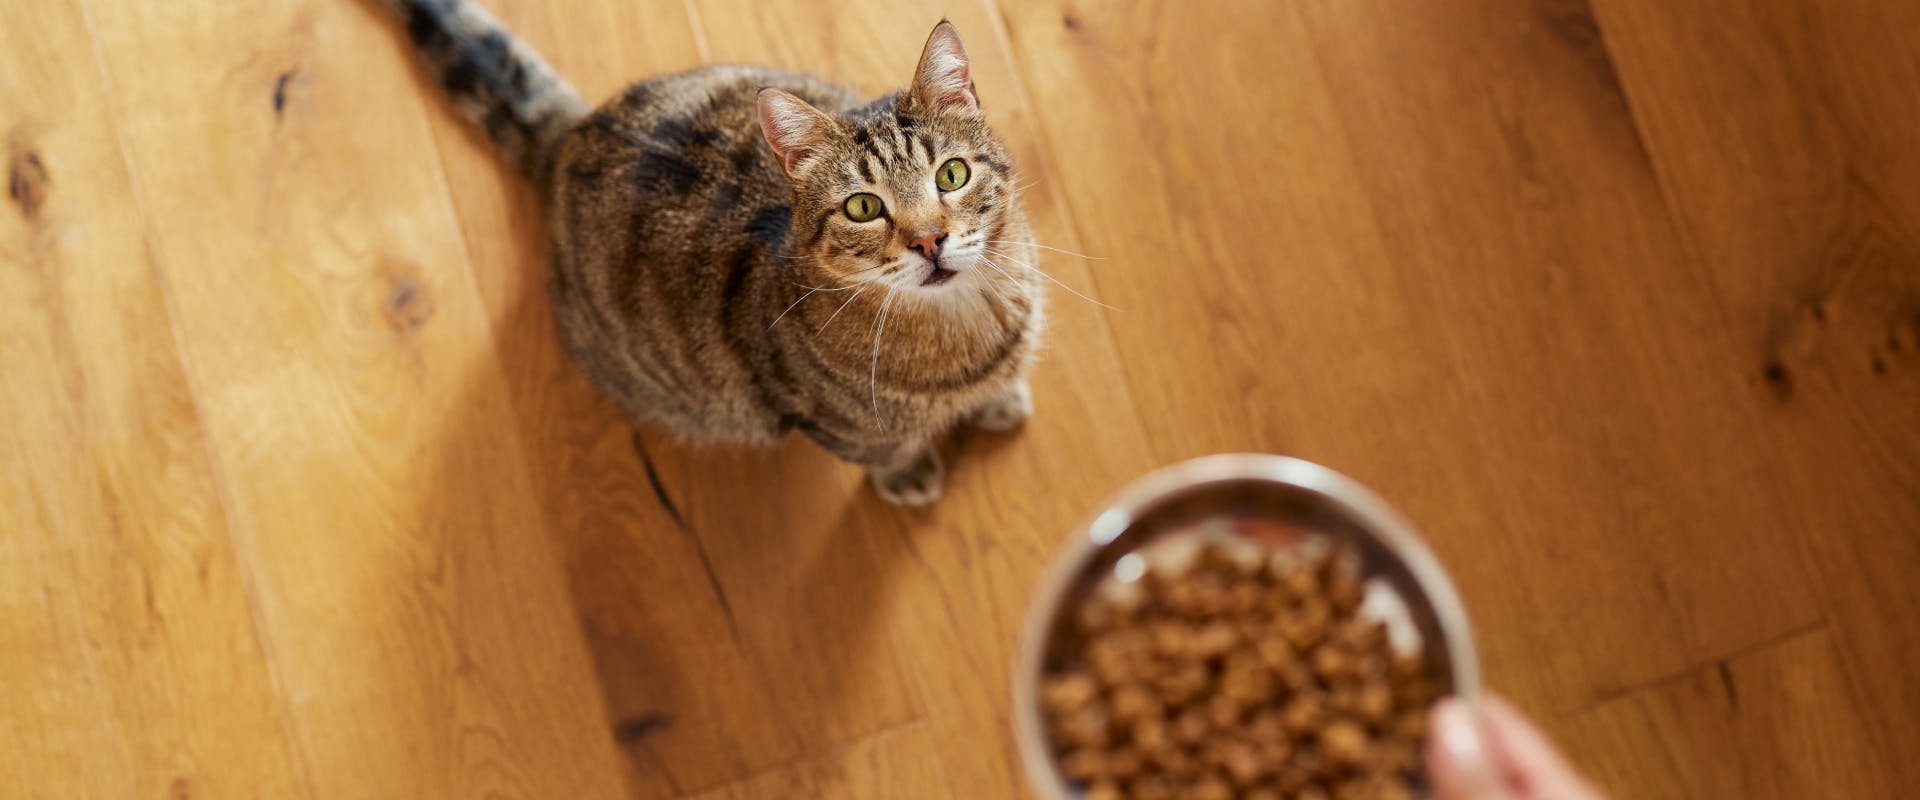 a tabby cat sitting on a wooden floor looking up at a human carrying a bowl of cat food